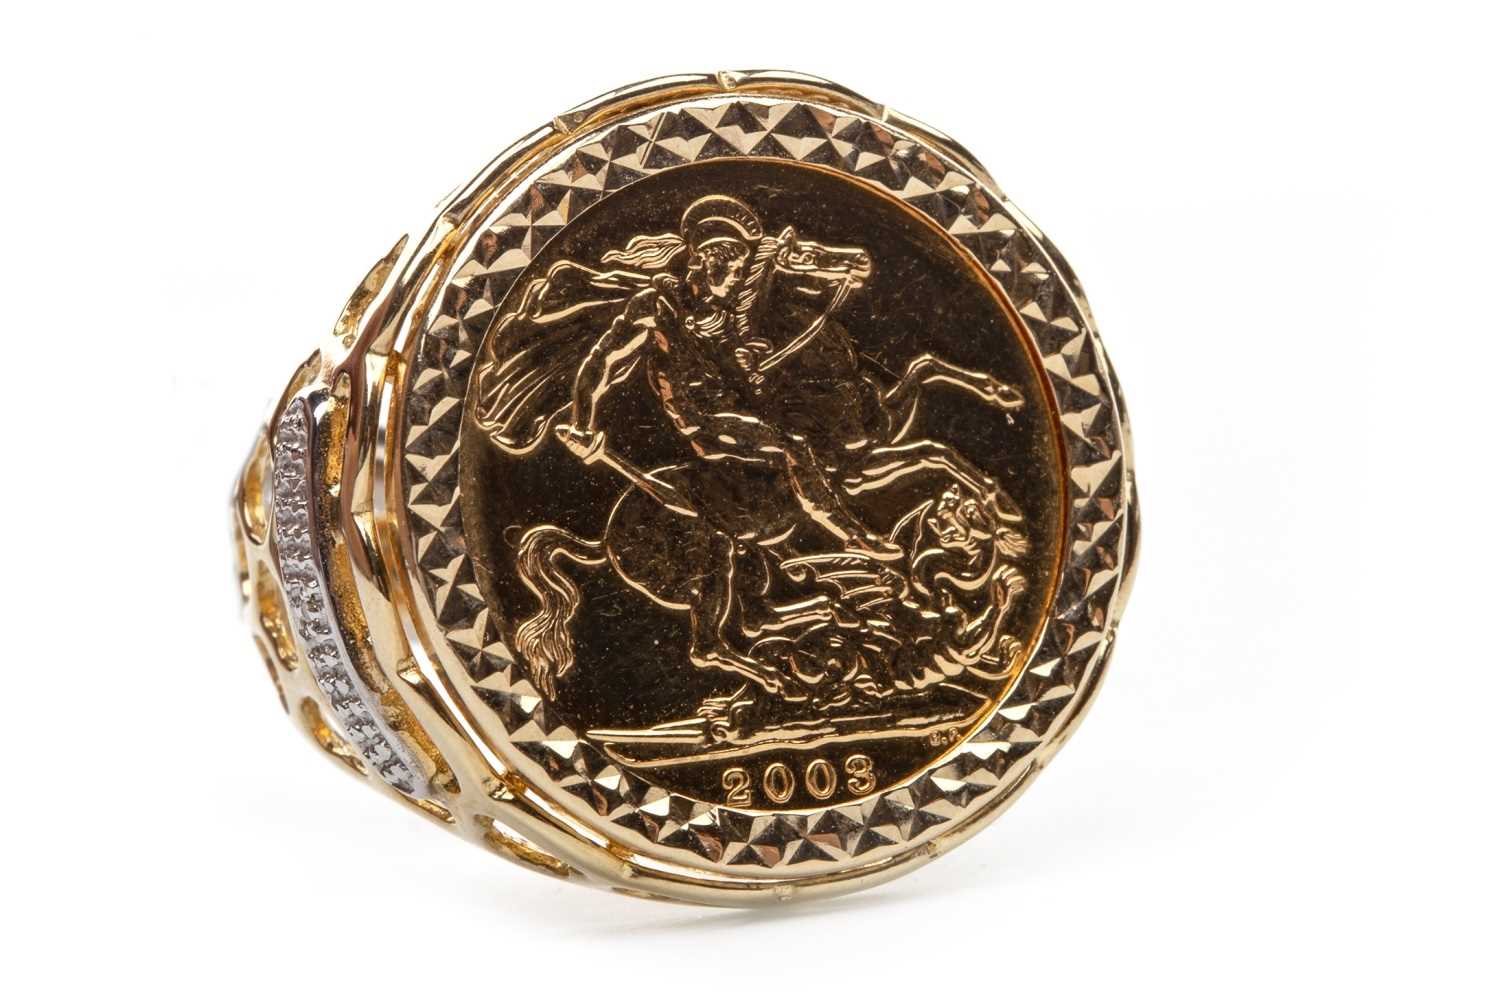 Lot 521 - A SOVEREIGN RING, 2003